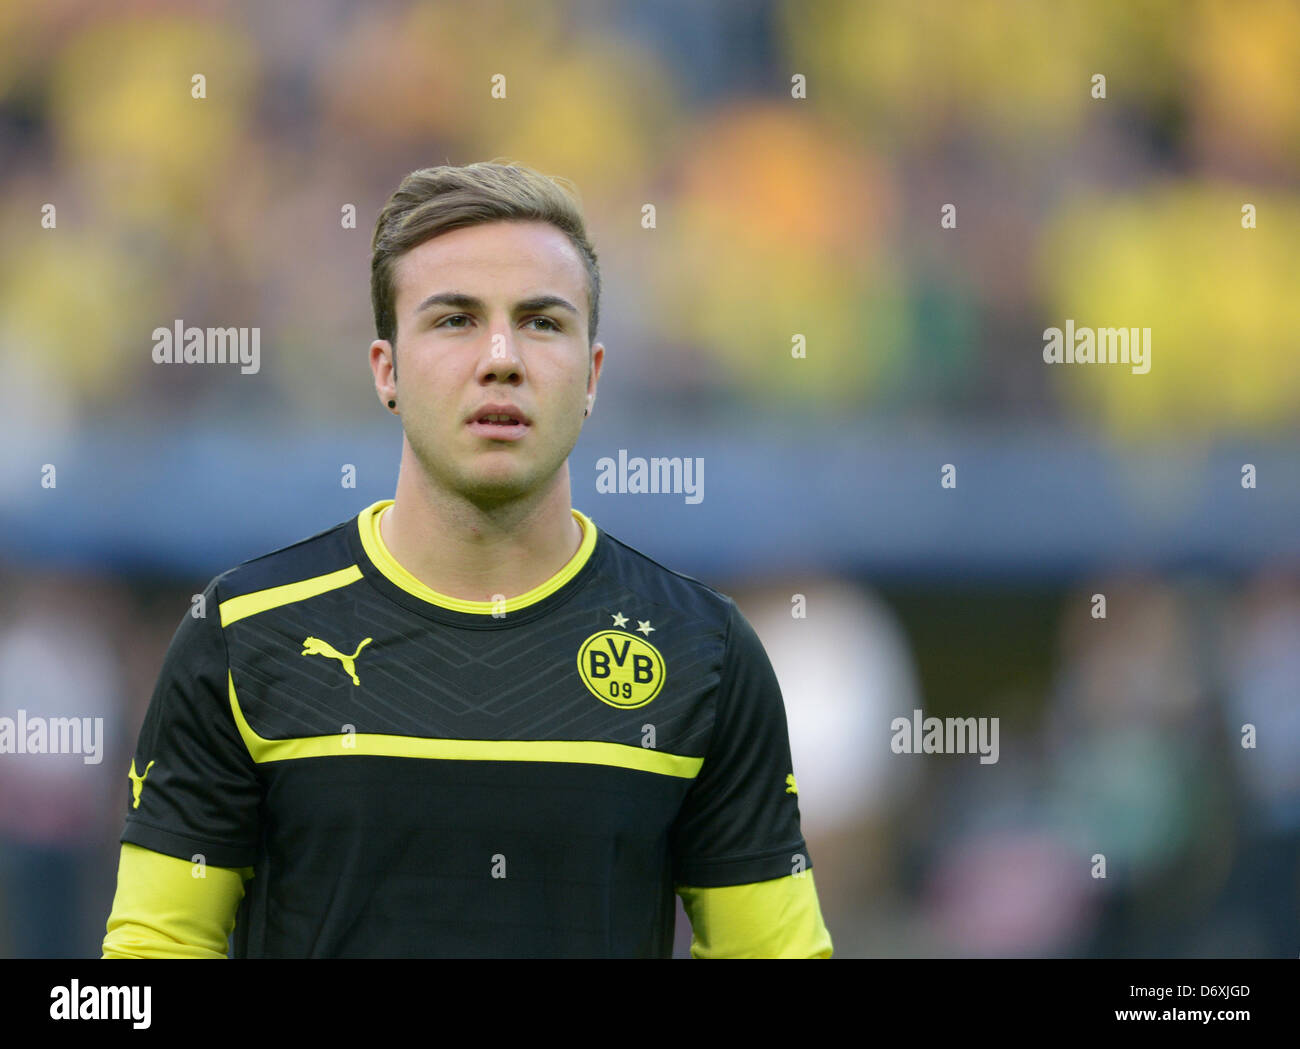 Dortmund Germany 24 April 13 Dortmund S Mario Goetze Seen The Warm Up Prior To The Uefa Champions League Semi Final First Leg Soccer Match Between Borussia Dortmund And Real Madrid At Bvb Stadium